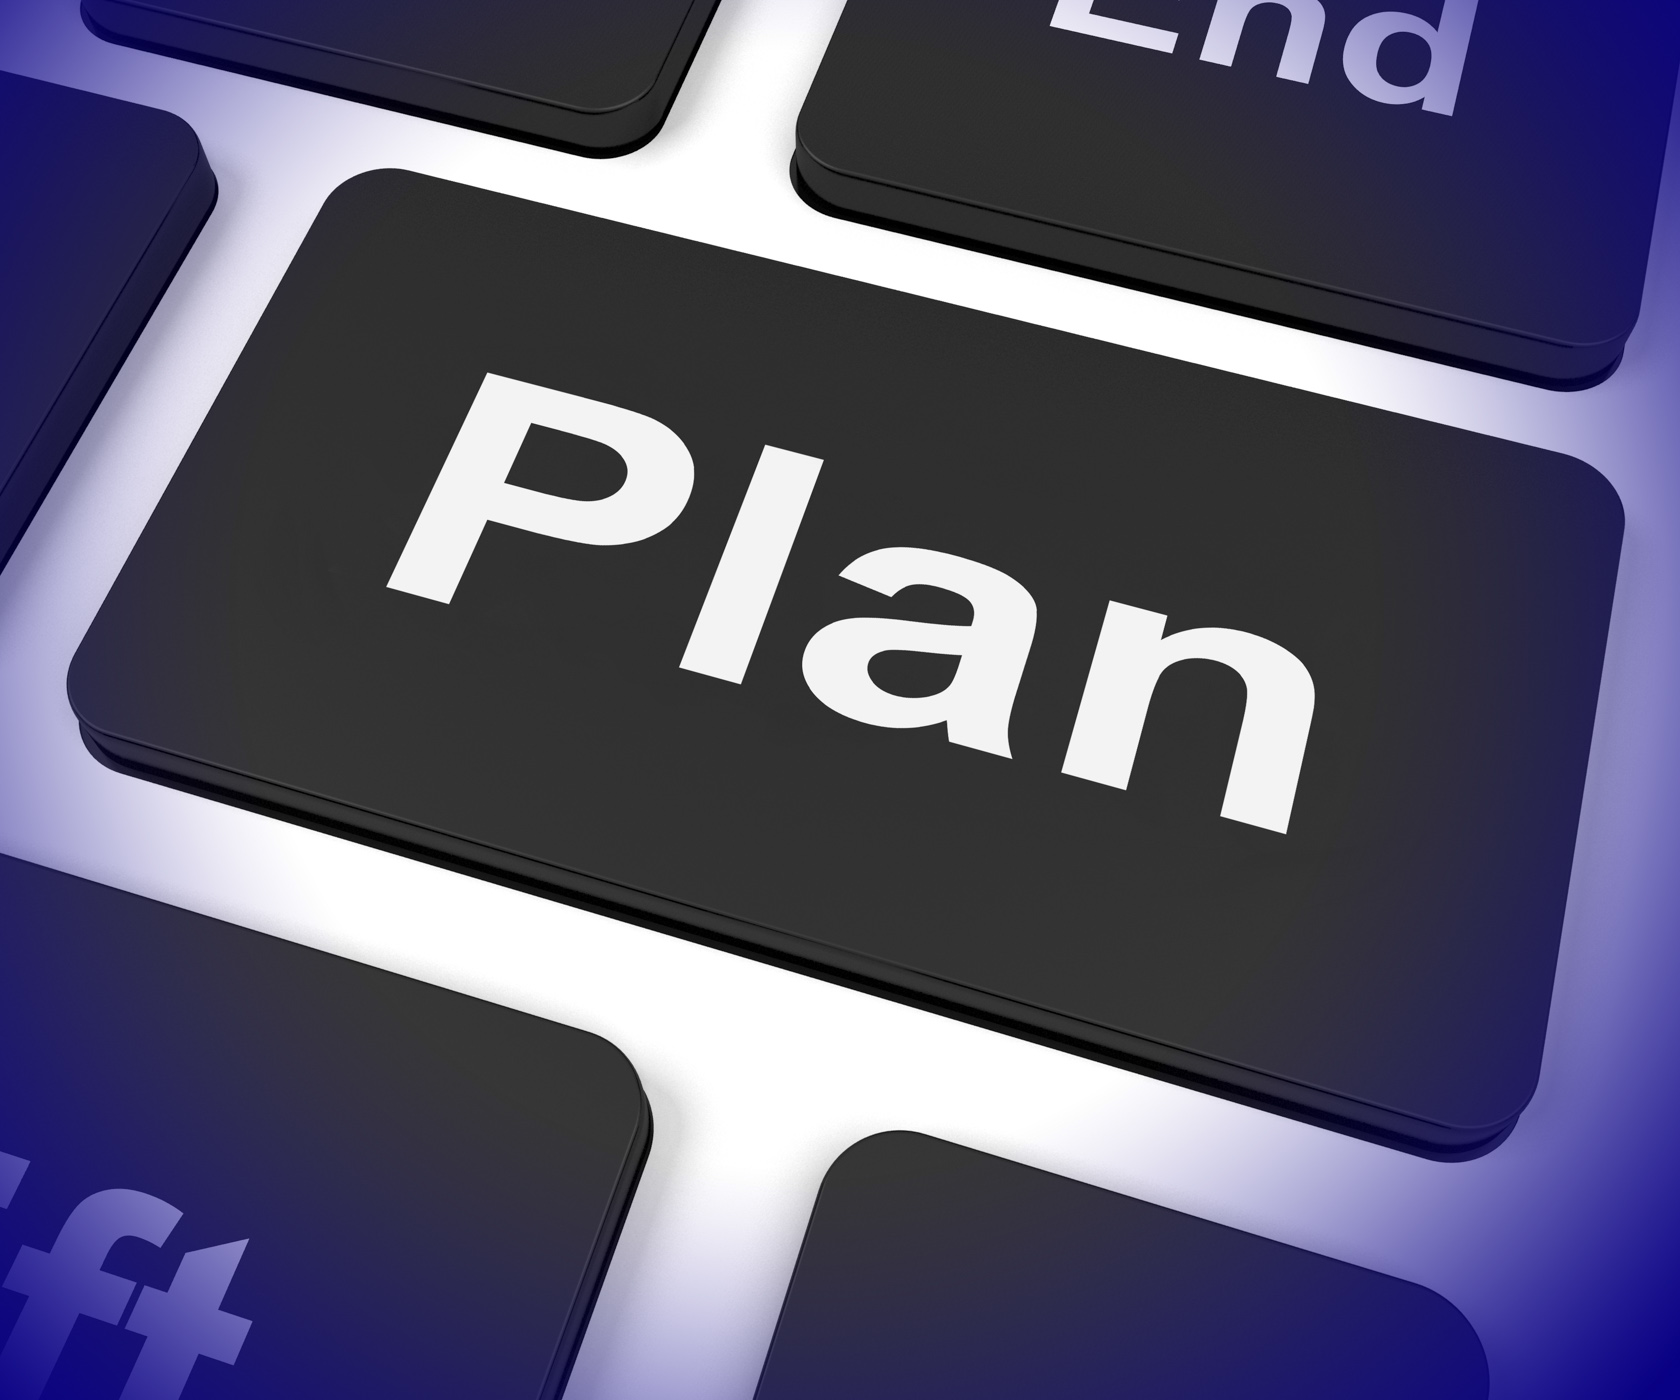 Plan key shows objectives planning and organizing photo